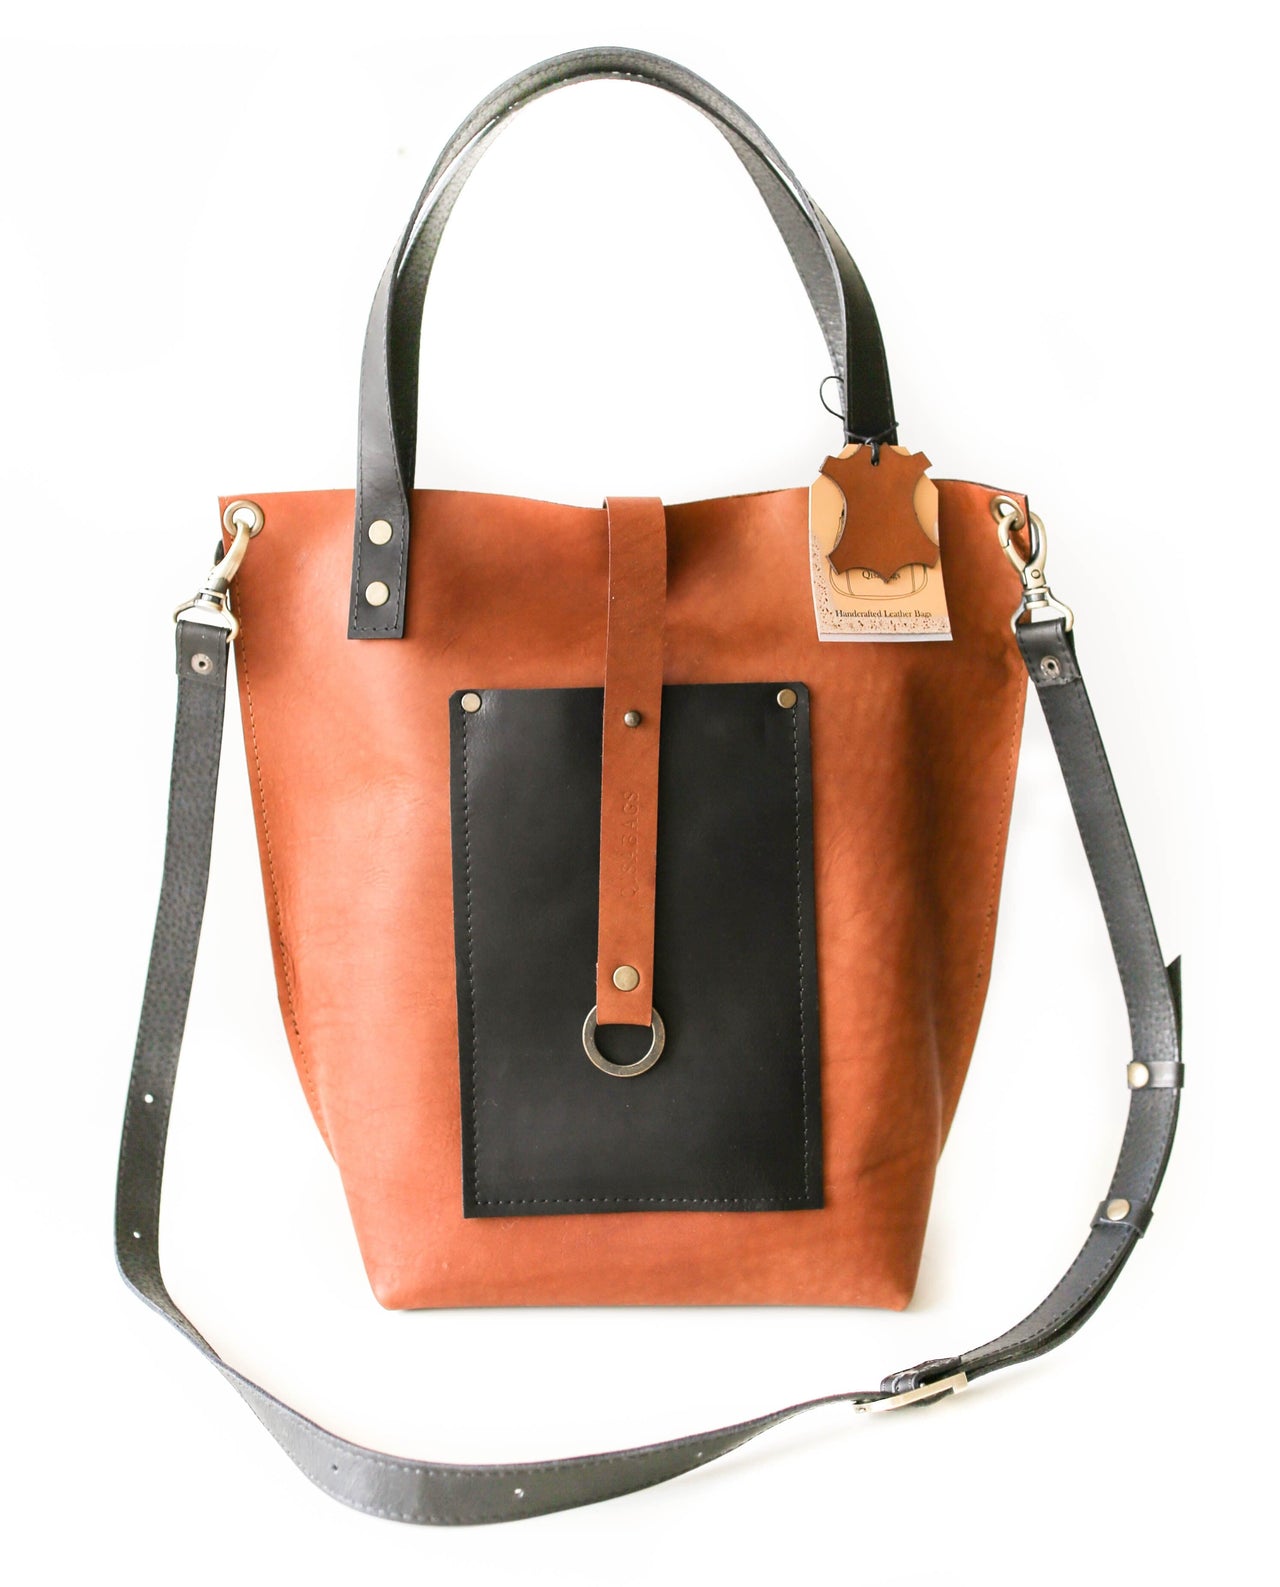 Brown Leather tote